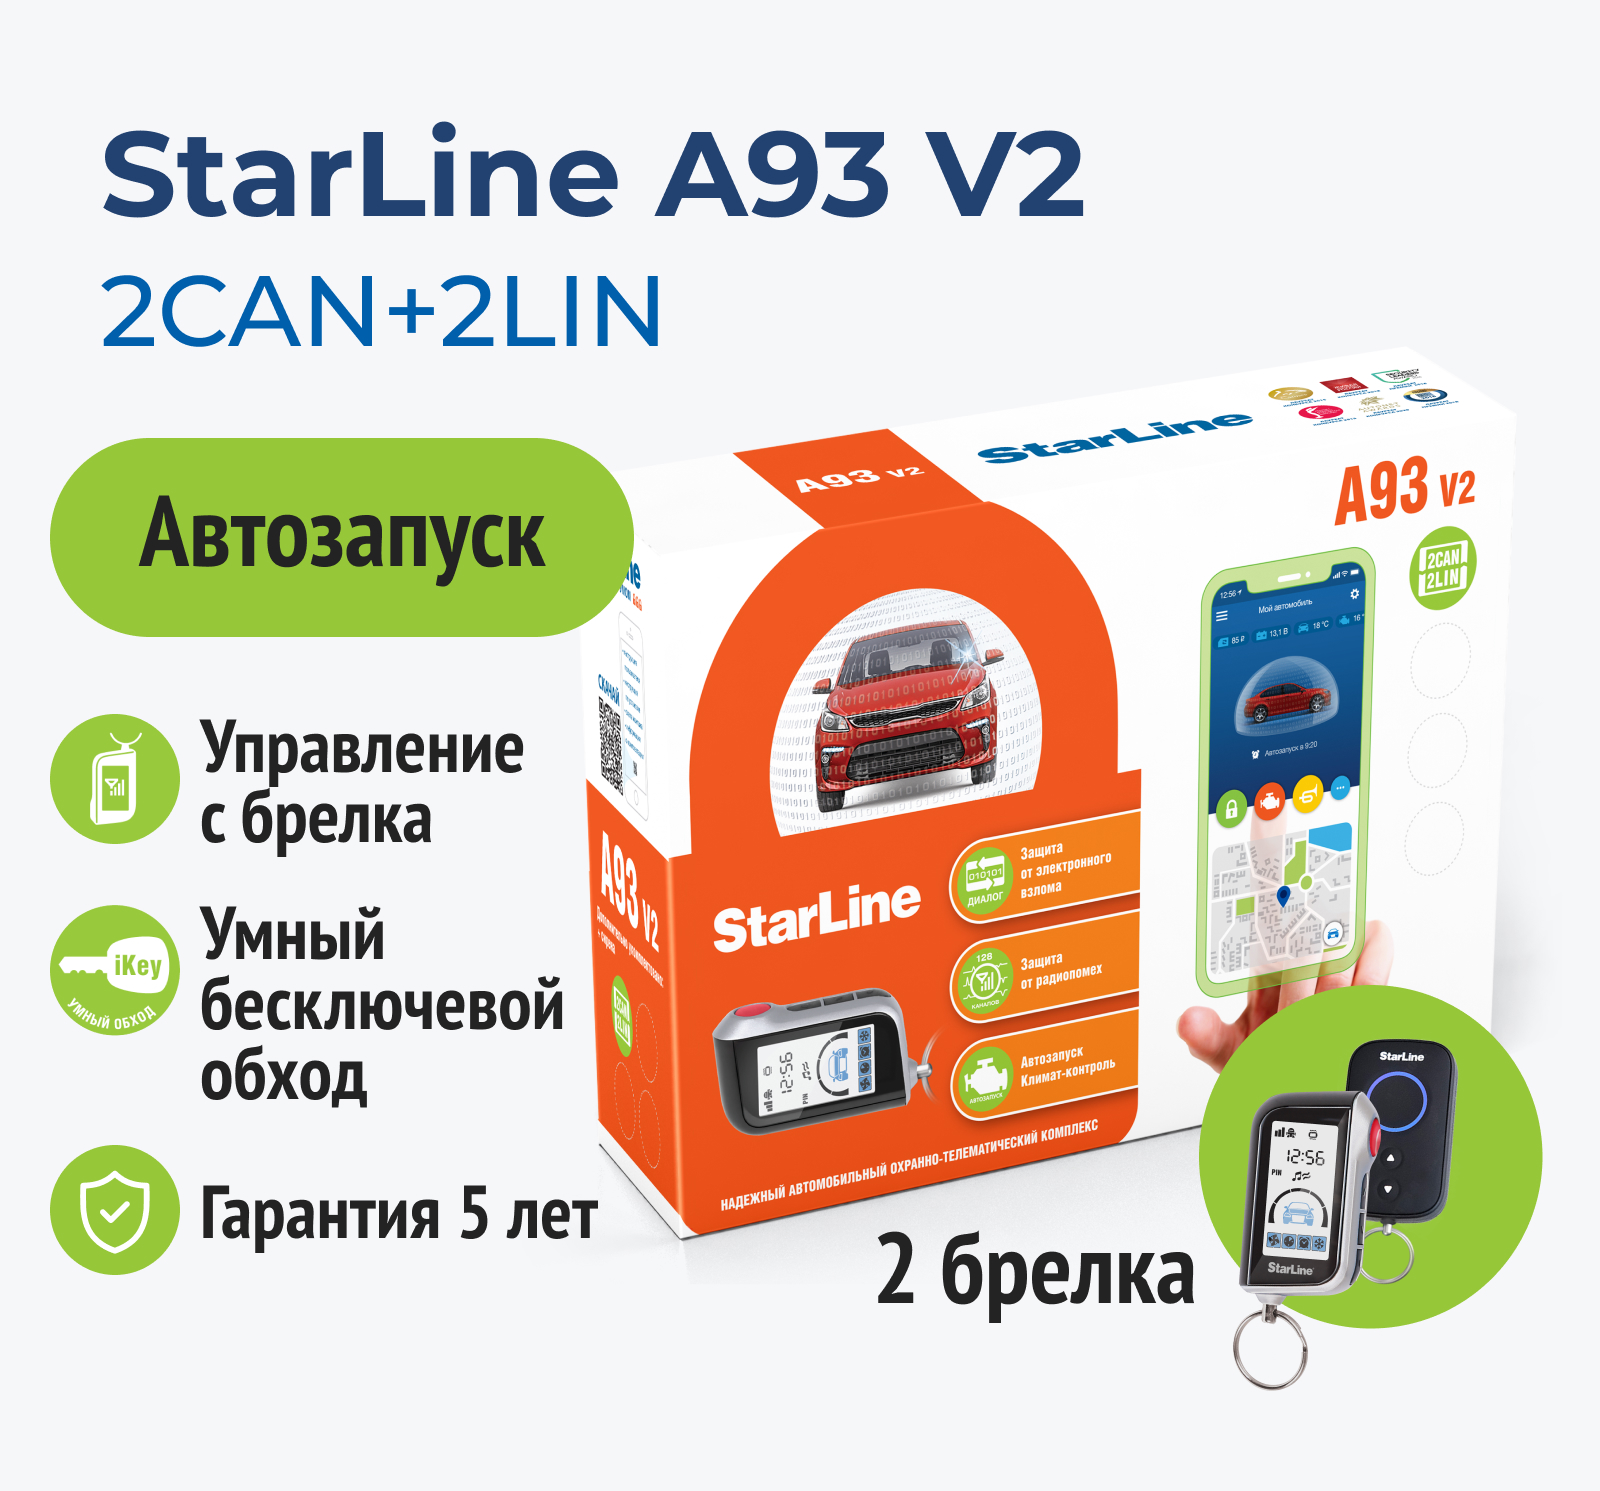 Starline 2can 2lin gsm. Старлайн а93 2can 2lin. STARLINE a93 v2 Eco. STARLINE a93 2can+2lin Eco. STARLINE a93 v2 2can+2lin GSM Eco.